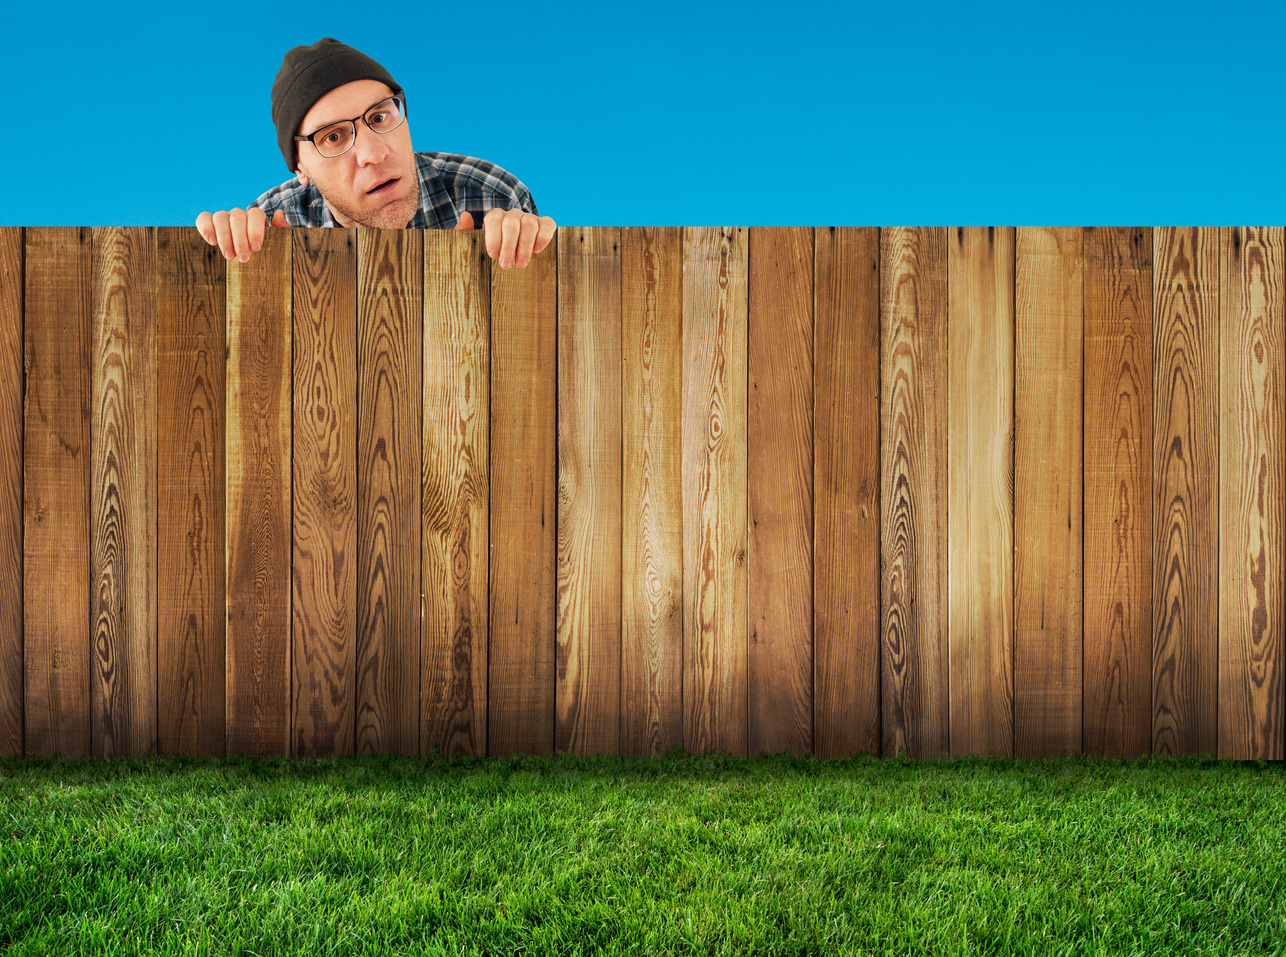 Neighbor looking over short wooden fence